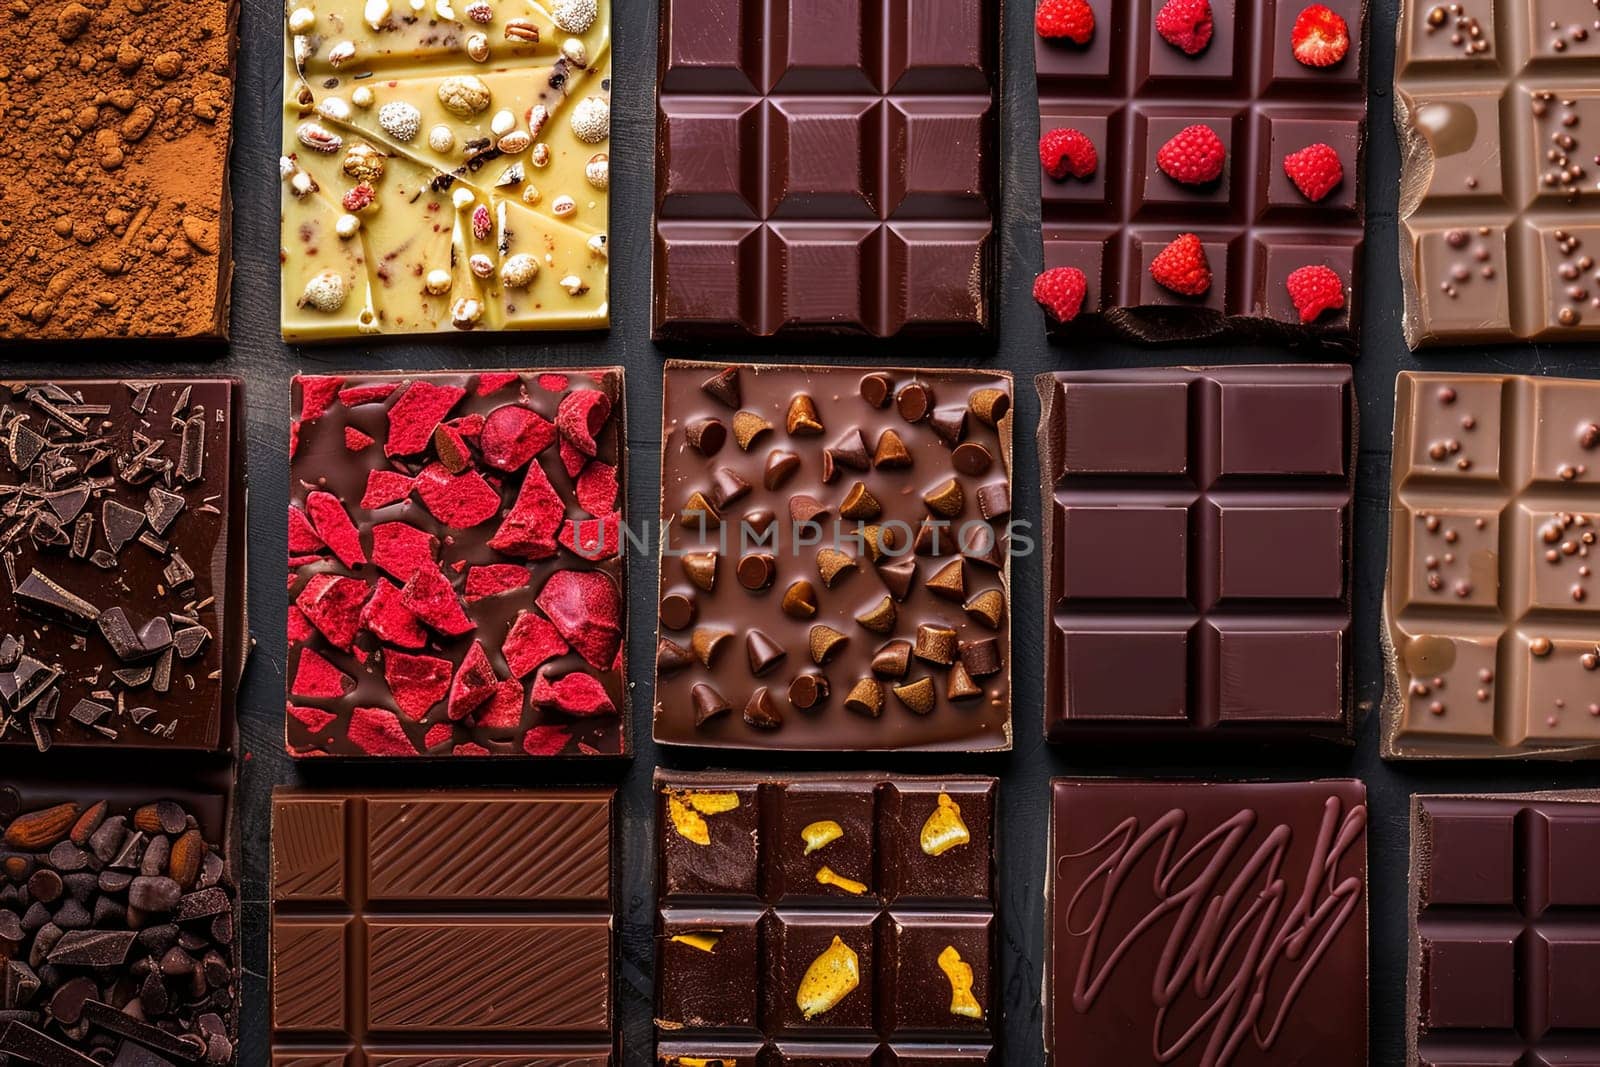 Assorted chocolate bars in various flavors and types are neatly arranged in a grid pattern.